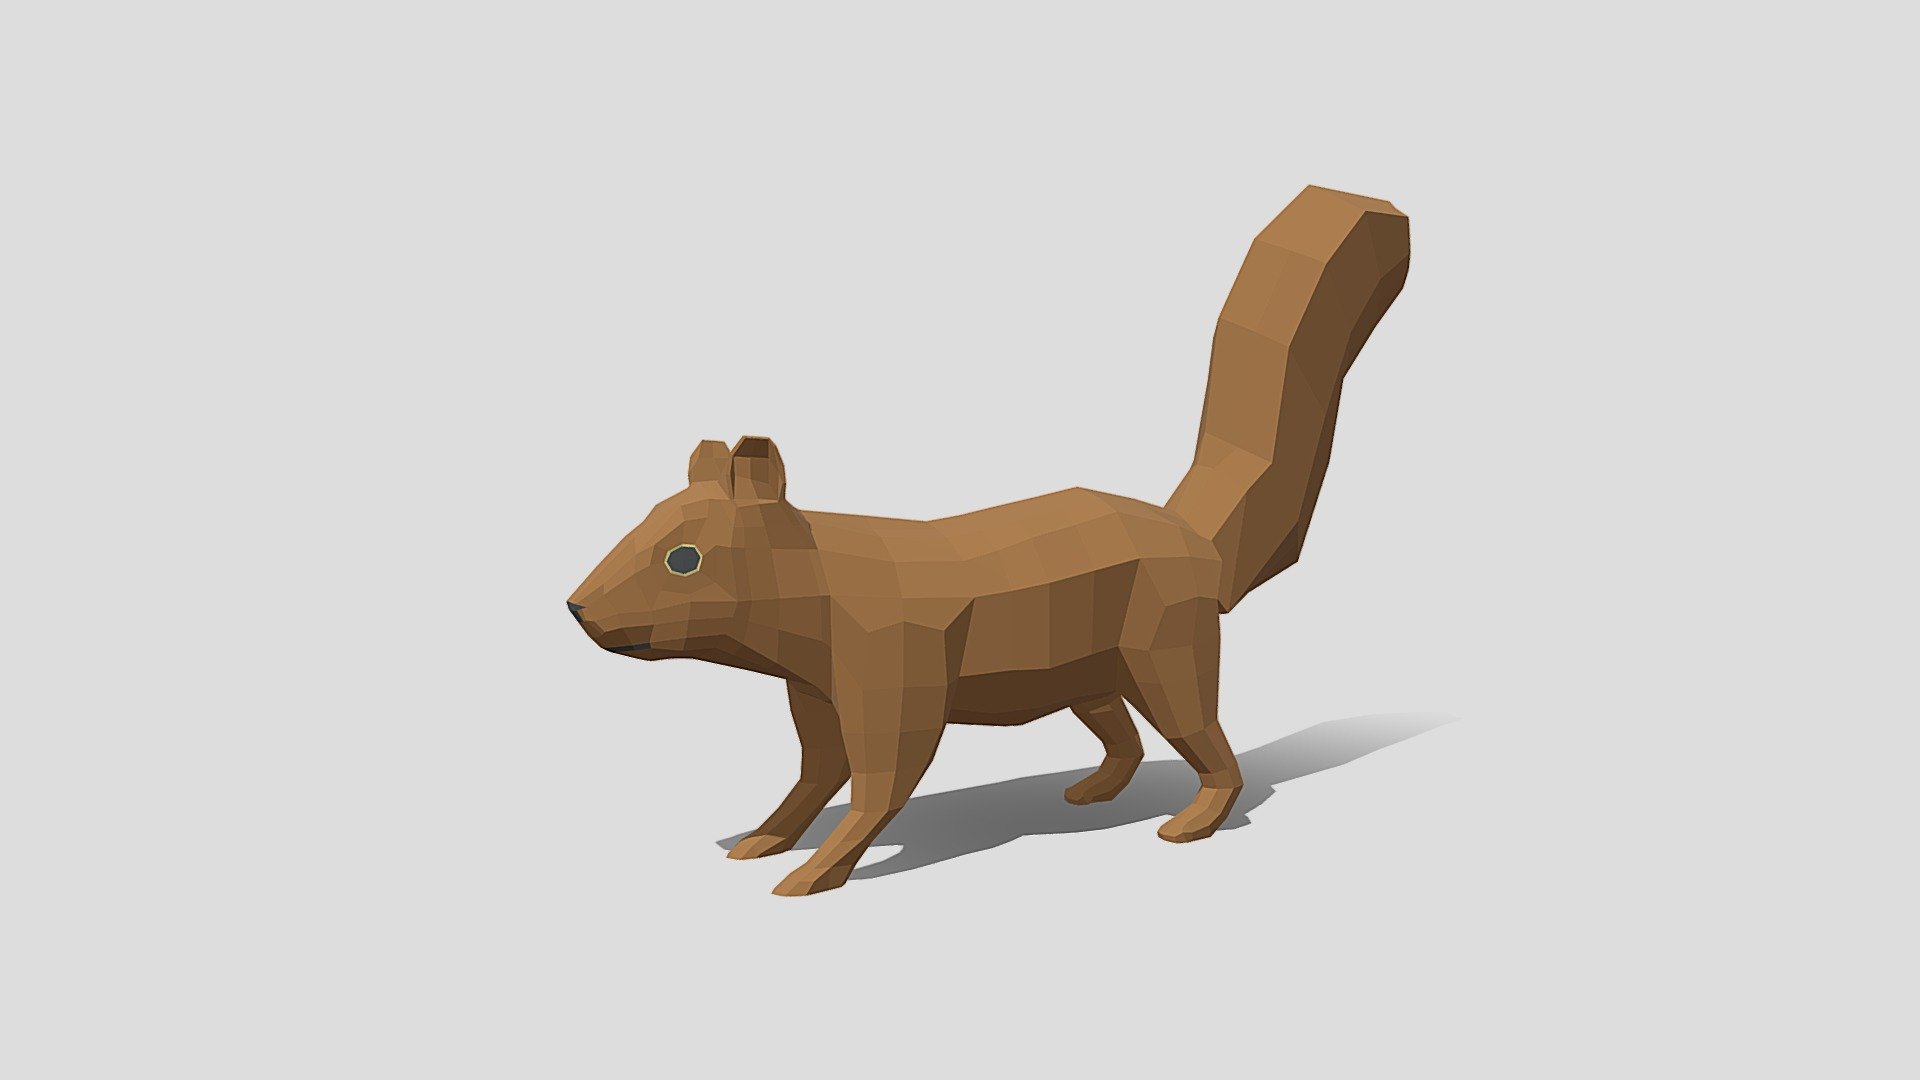 This is a low poly 3d model of a squirrel. The low poly squirrel was modelled and prepared for low-poly style renderings, background, general CG visualization.

The 3d squirrel model is presented as a mesh with quads only.

Verts : 820 Faces: 818

Simple diffuse colors.

No ring, maps and no UVW mapping is available.

The original file was created in blender. You will receive a 3DS, OBJ, FBX, blend, DAE, Stl.

All preview images were rendered with Blender Cycles. Product is ready to render out-of-the-box. Please note that the lights, cameras, and background is only included in the .blend file. The model is clean and alone in the other provided files, centred at origin and has real-world scale 3d model